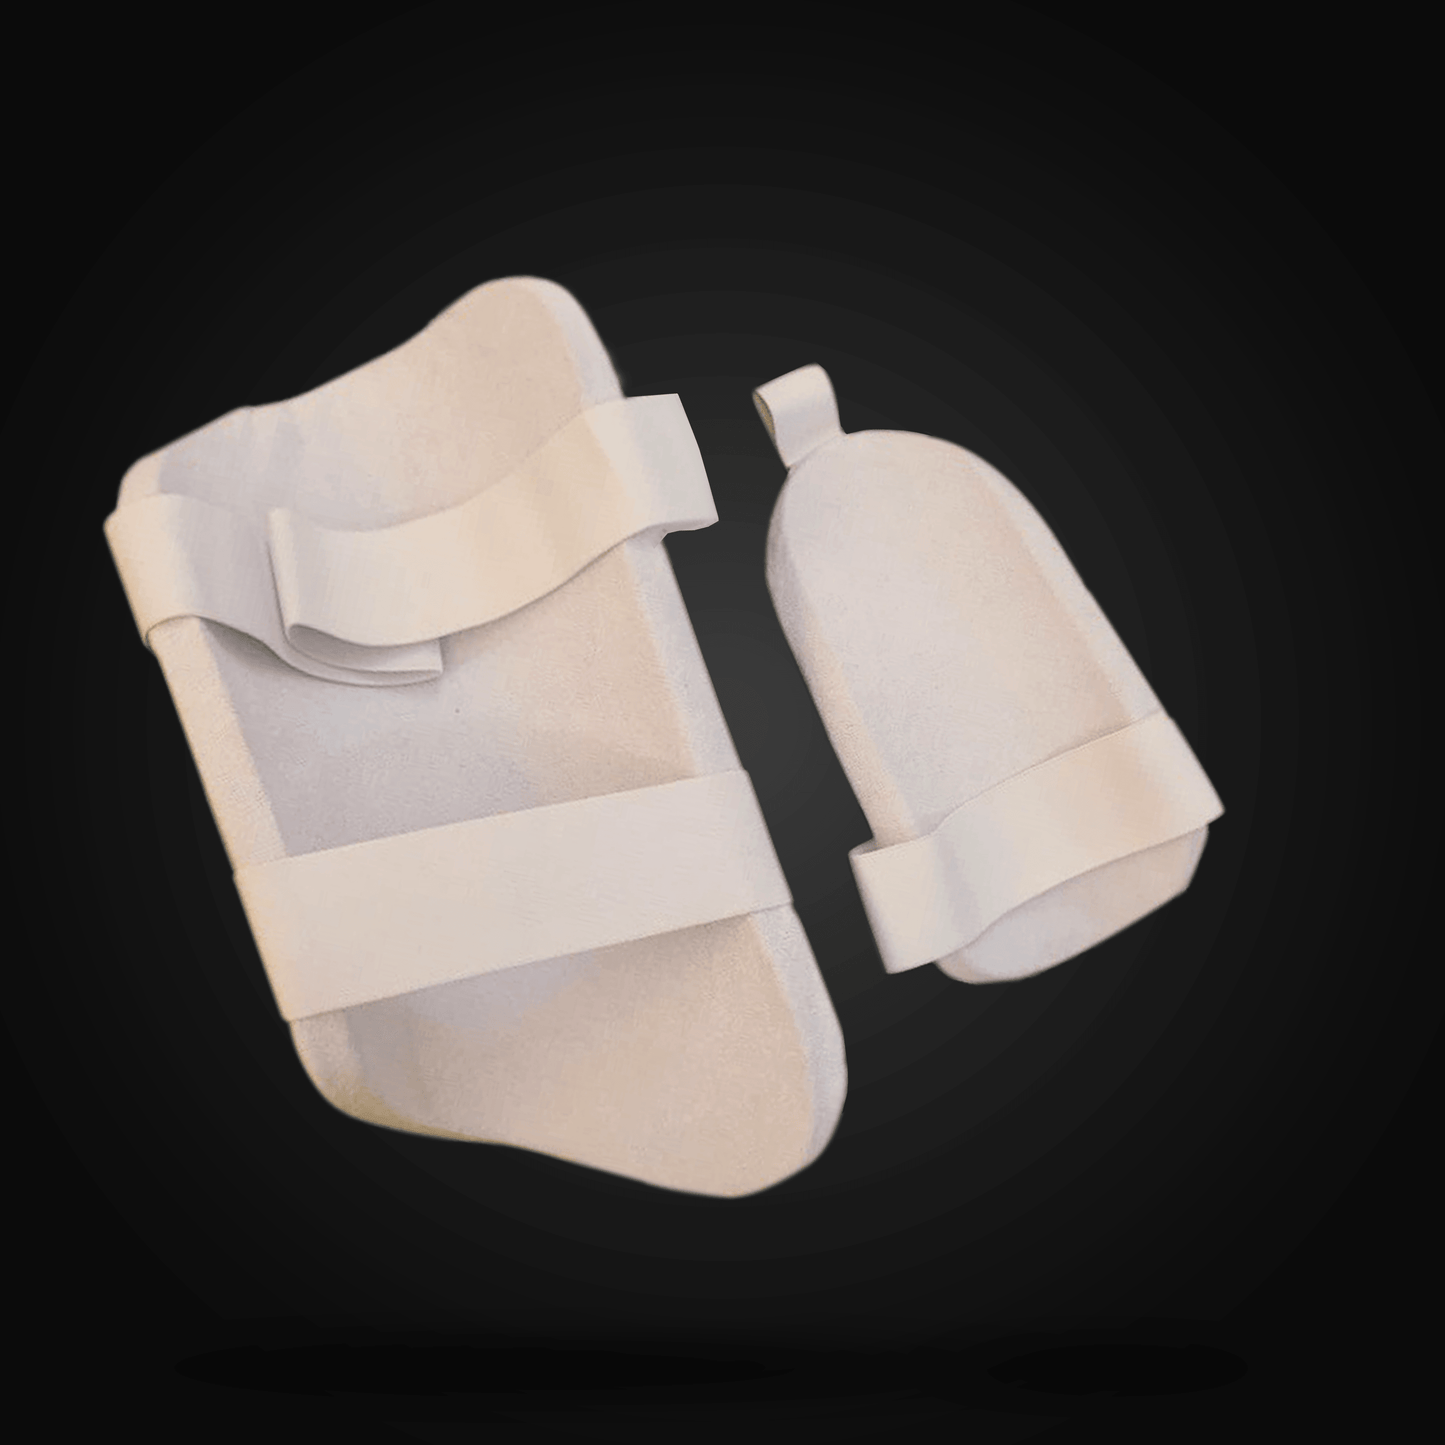 Cricket white double thigh guard test cricket thigh guard